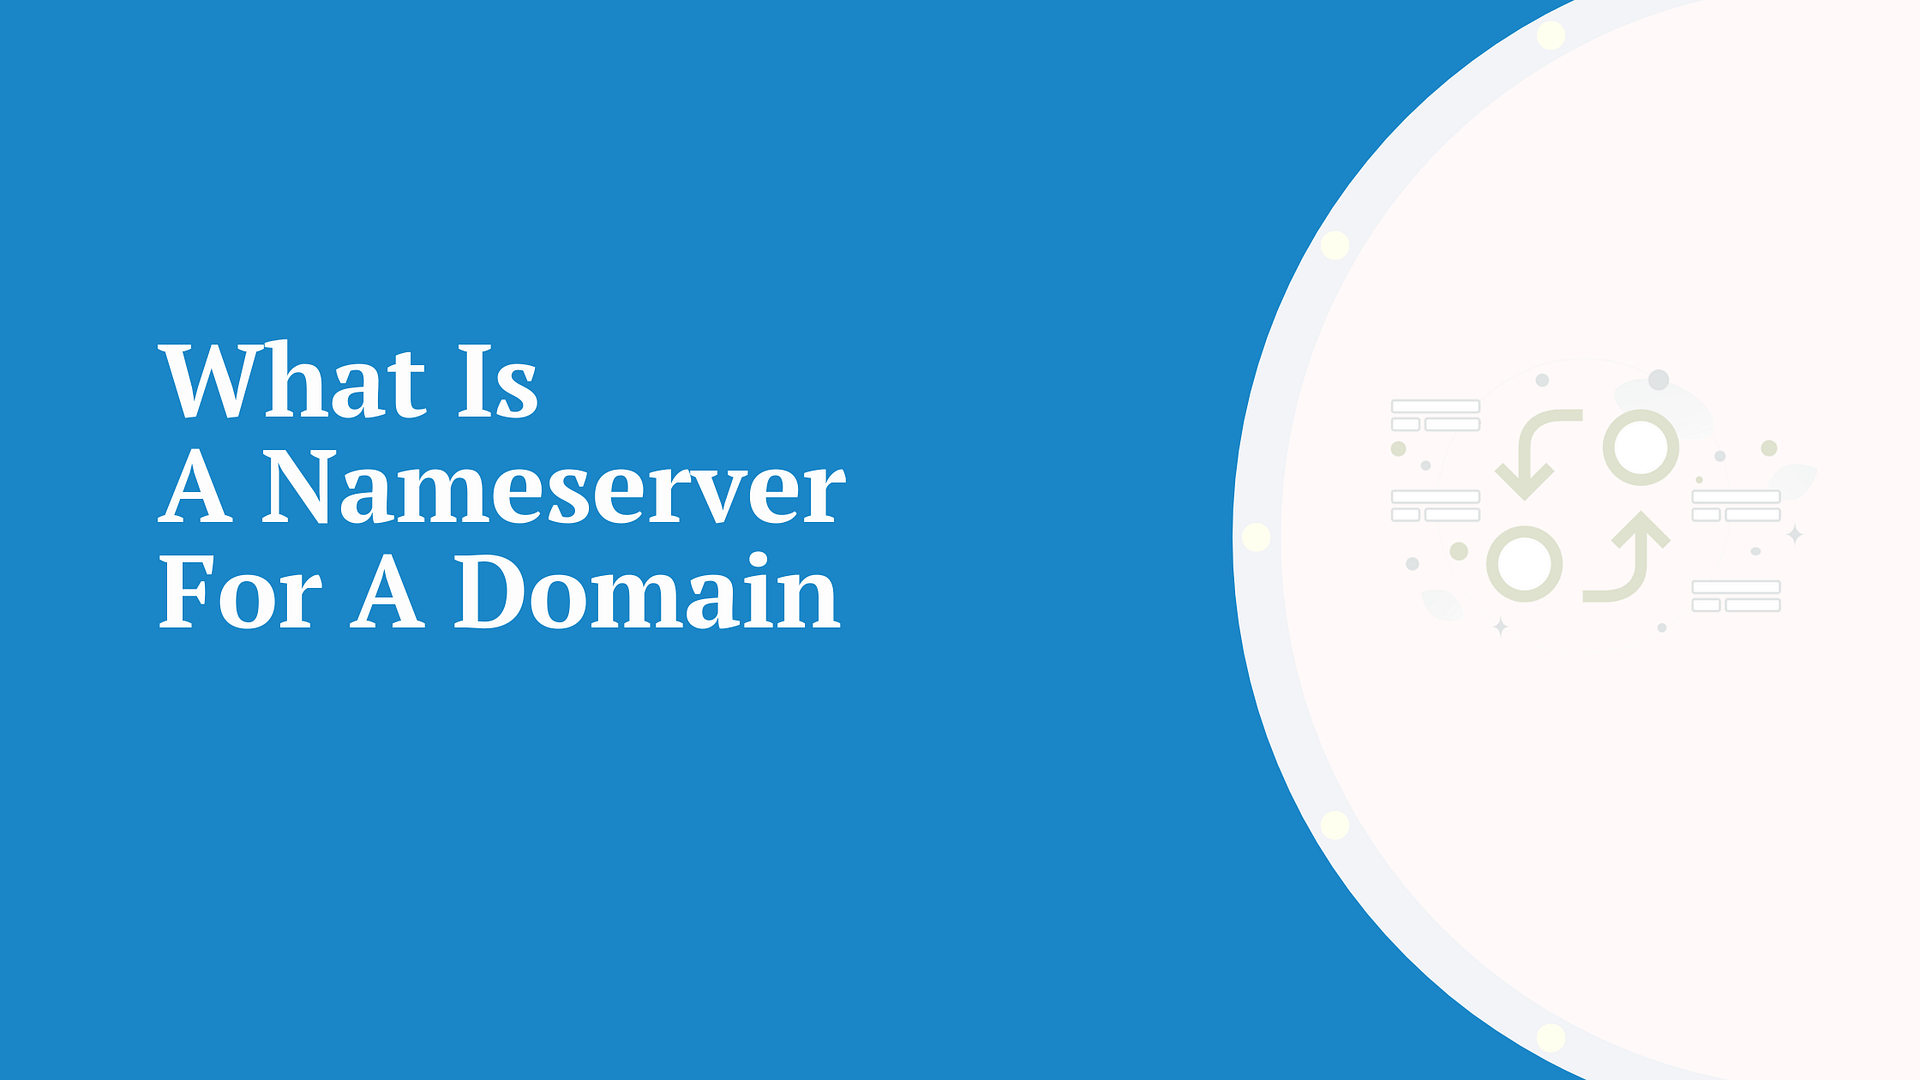 What is a nameserver for a domain.